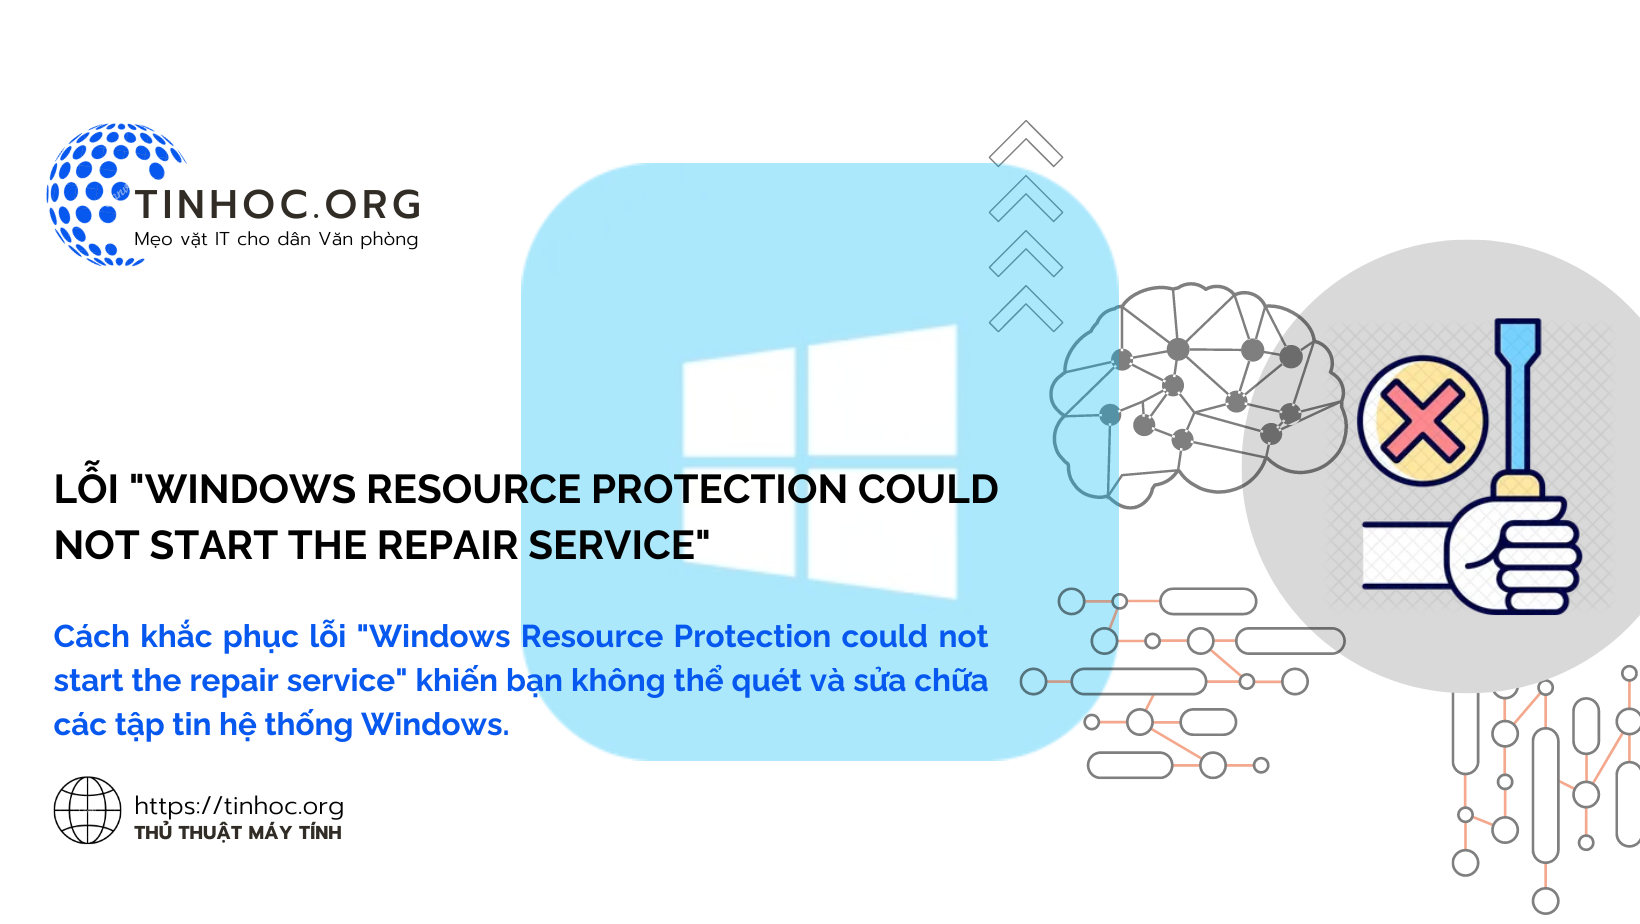 Lỗi "Windows Resource Protection could not start the repair service"